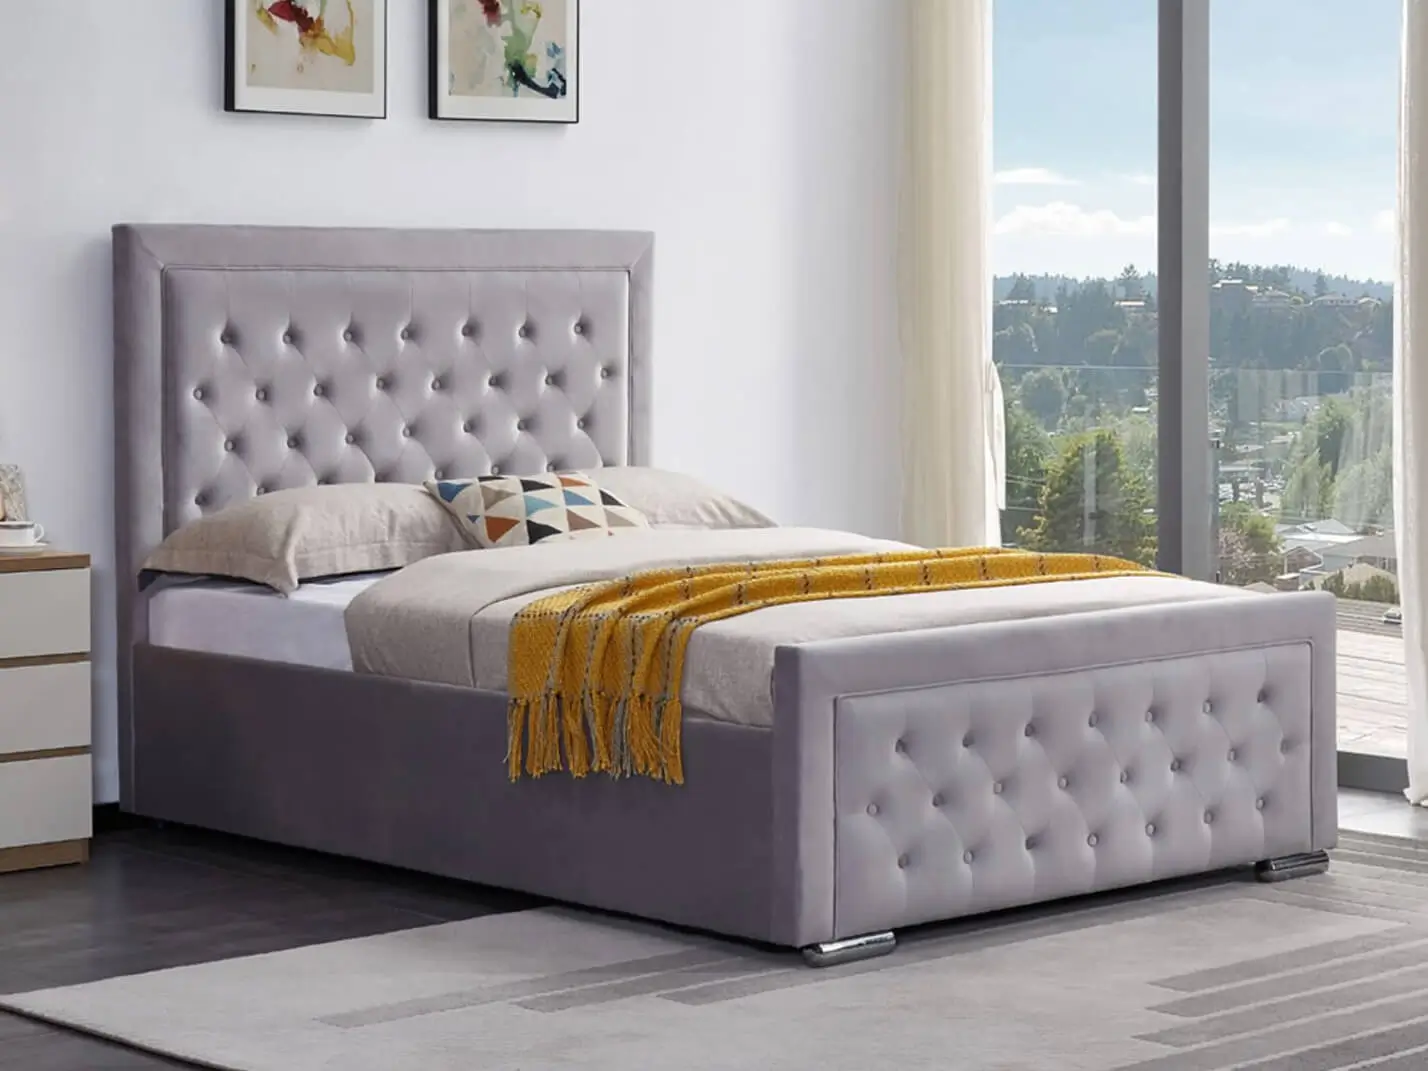 Top Reasons For Buying a Plush Velvet Bed